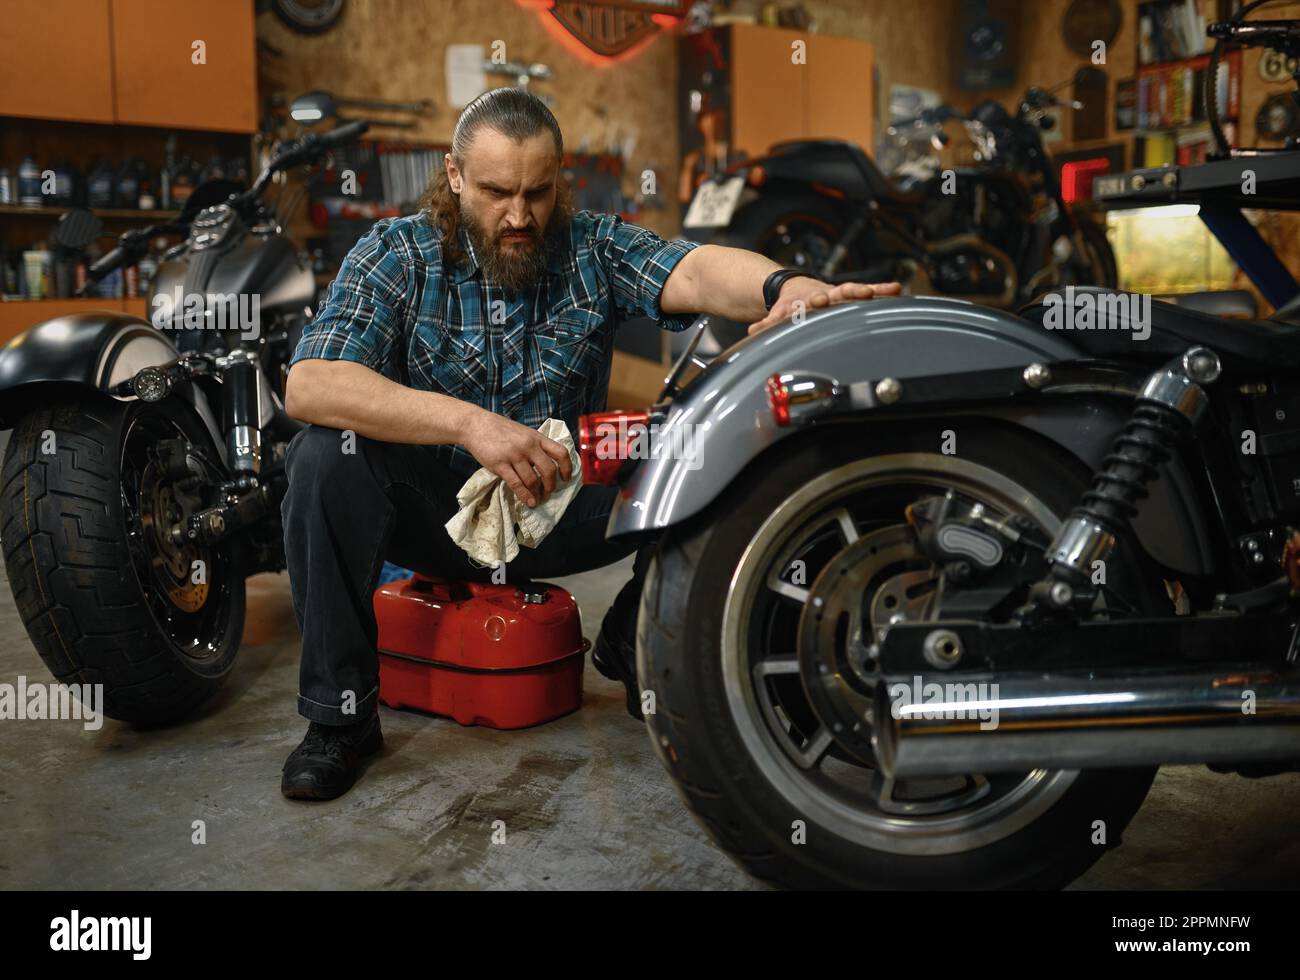 Bearded mature man biker cleaning motorcycle in garage workstation Stock Photo